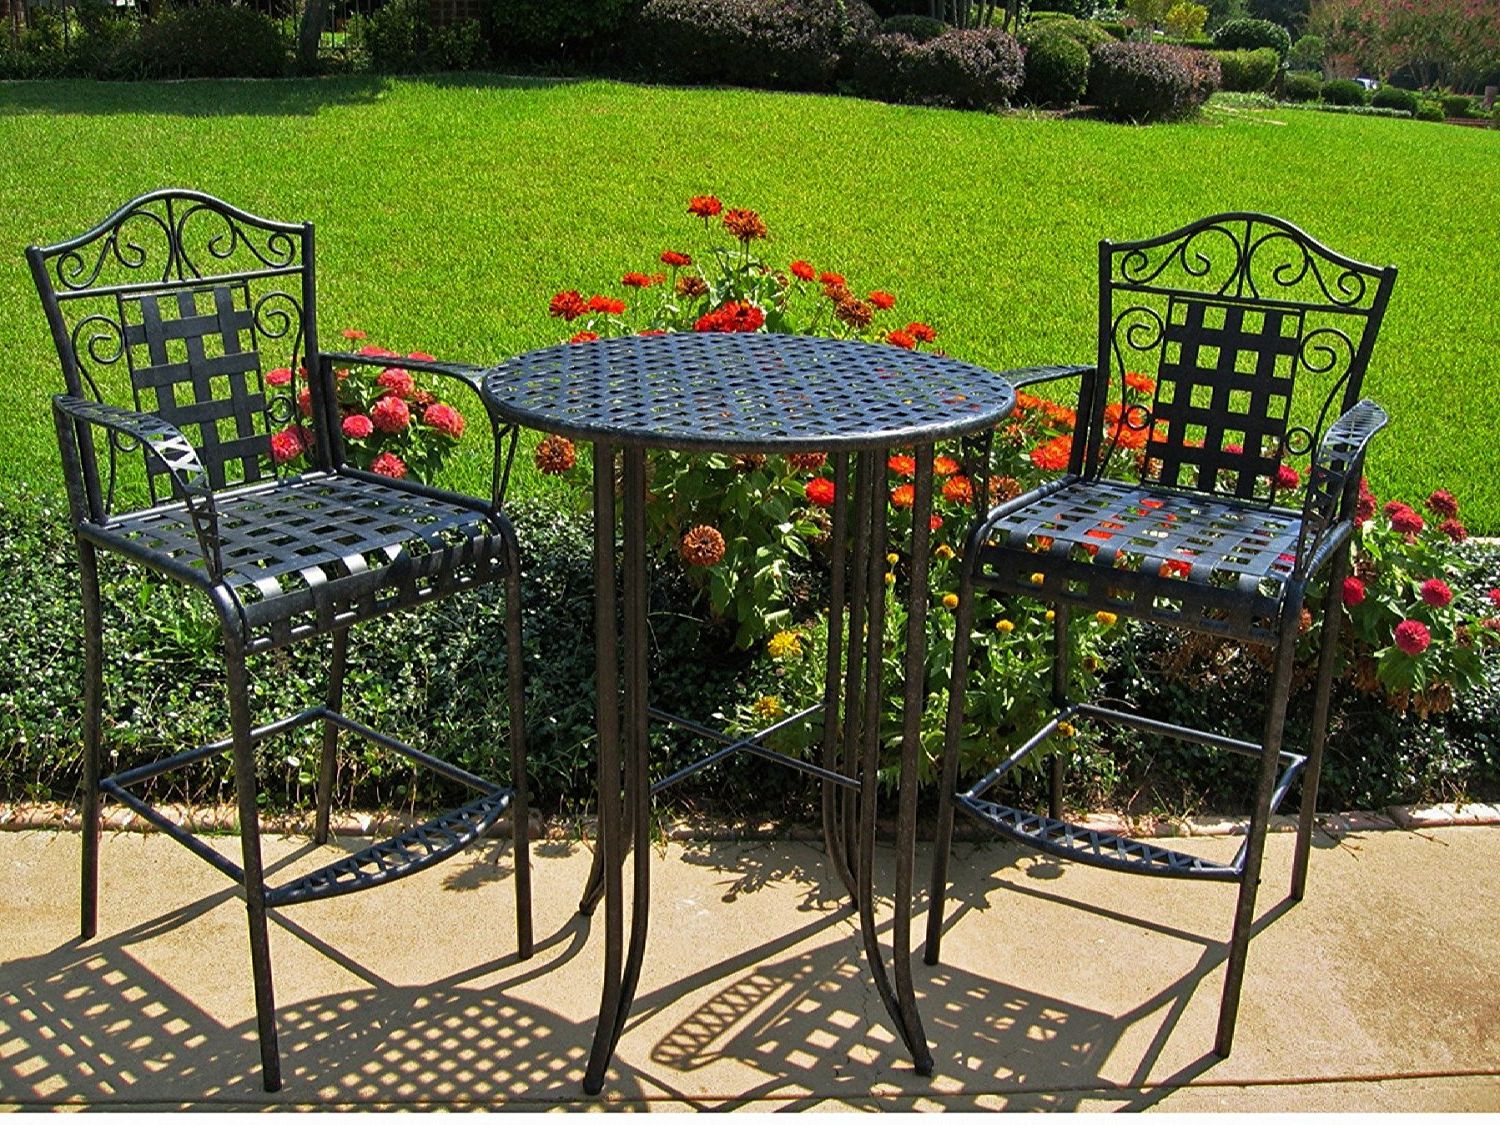 3 Piece Patio Bistro Sets With Current 3 Piece Bar Height Patio Bistro Sets For The Outdoors – Reviews (View 8 of 15)